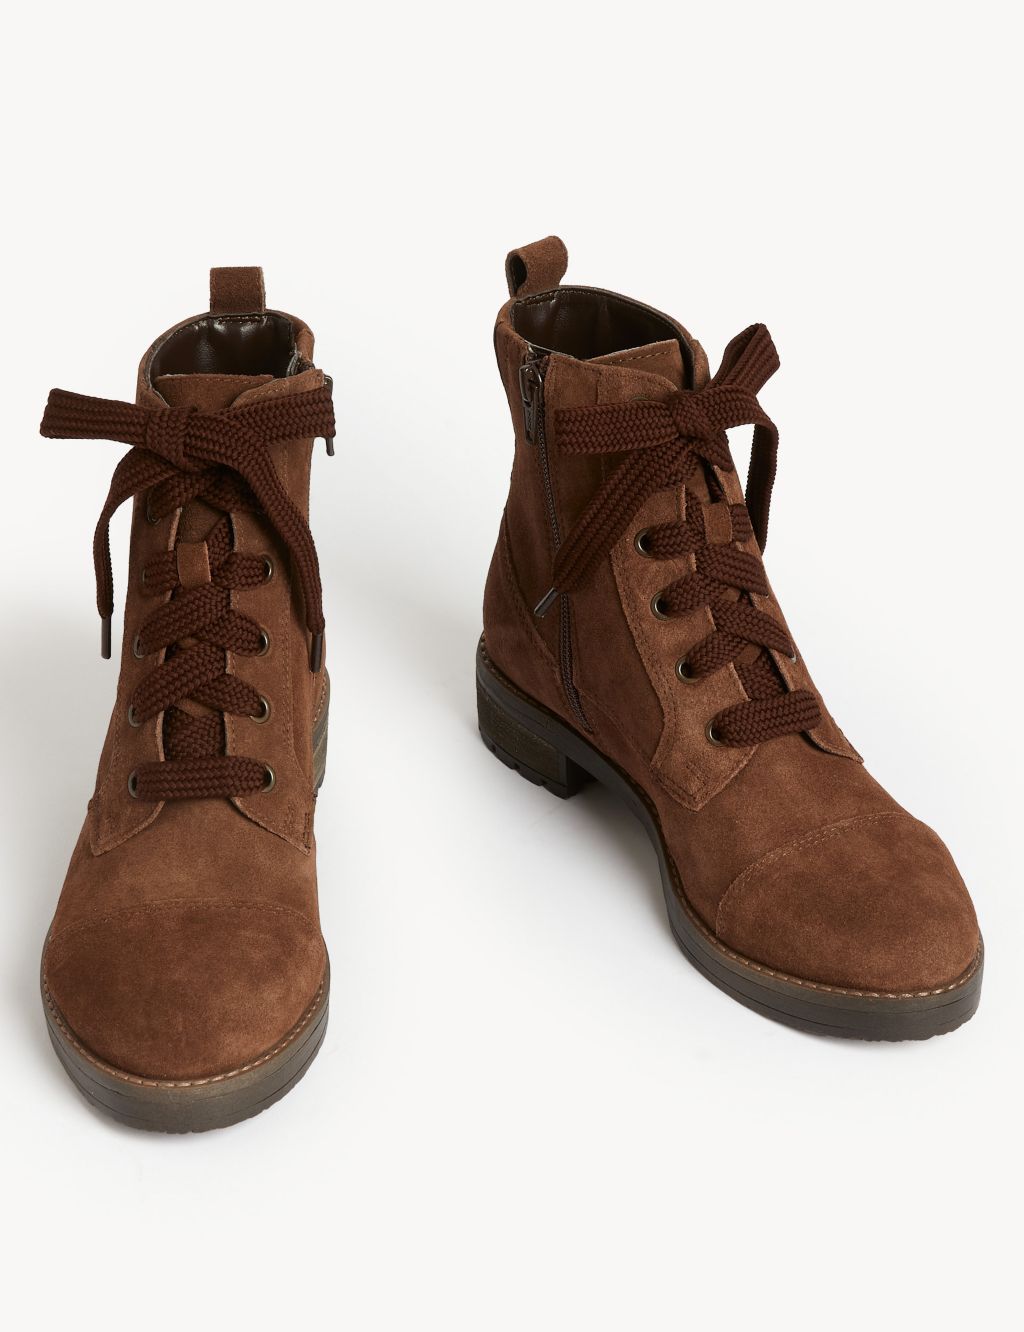 Suede Lace Up Ankle Boots image 2